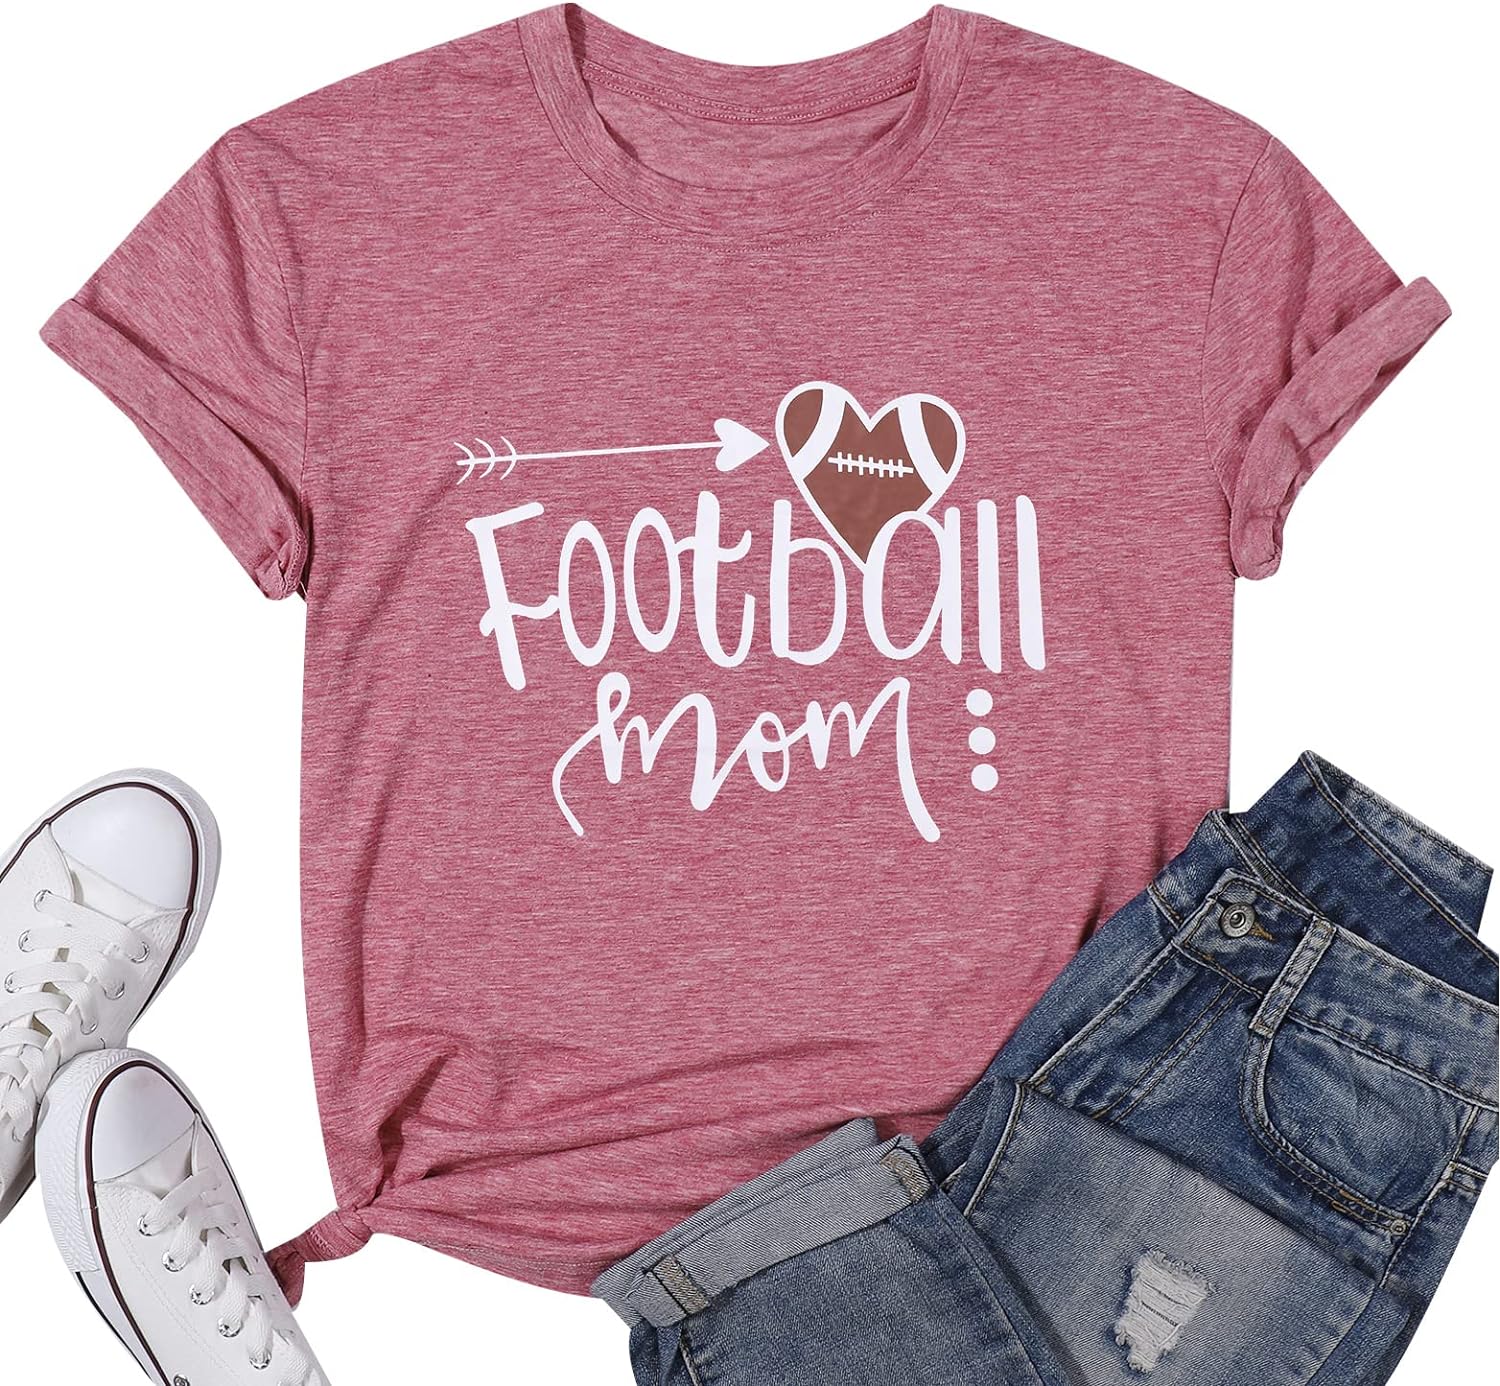 Football Mom T Shirts Women Love Heart Football Tee Shirts Casual Short Sleeve Game Day Tee Tops with Saying Loose Top